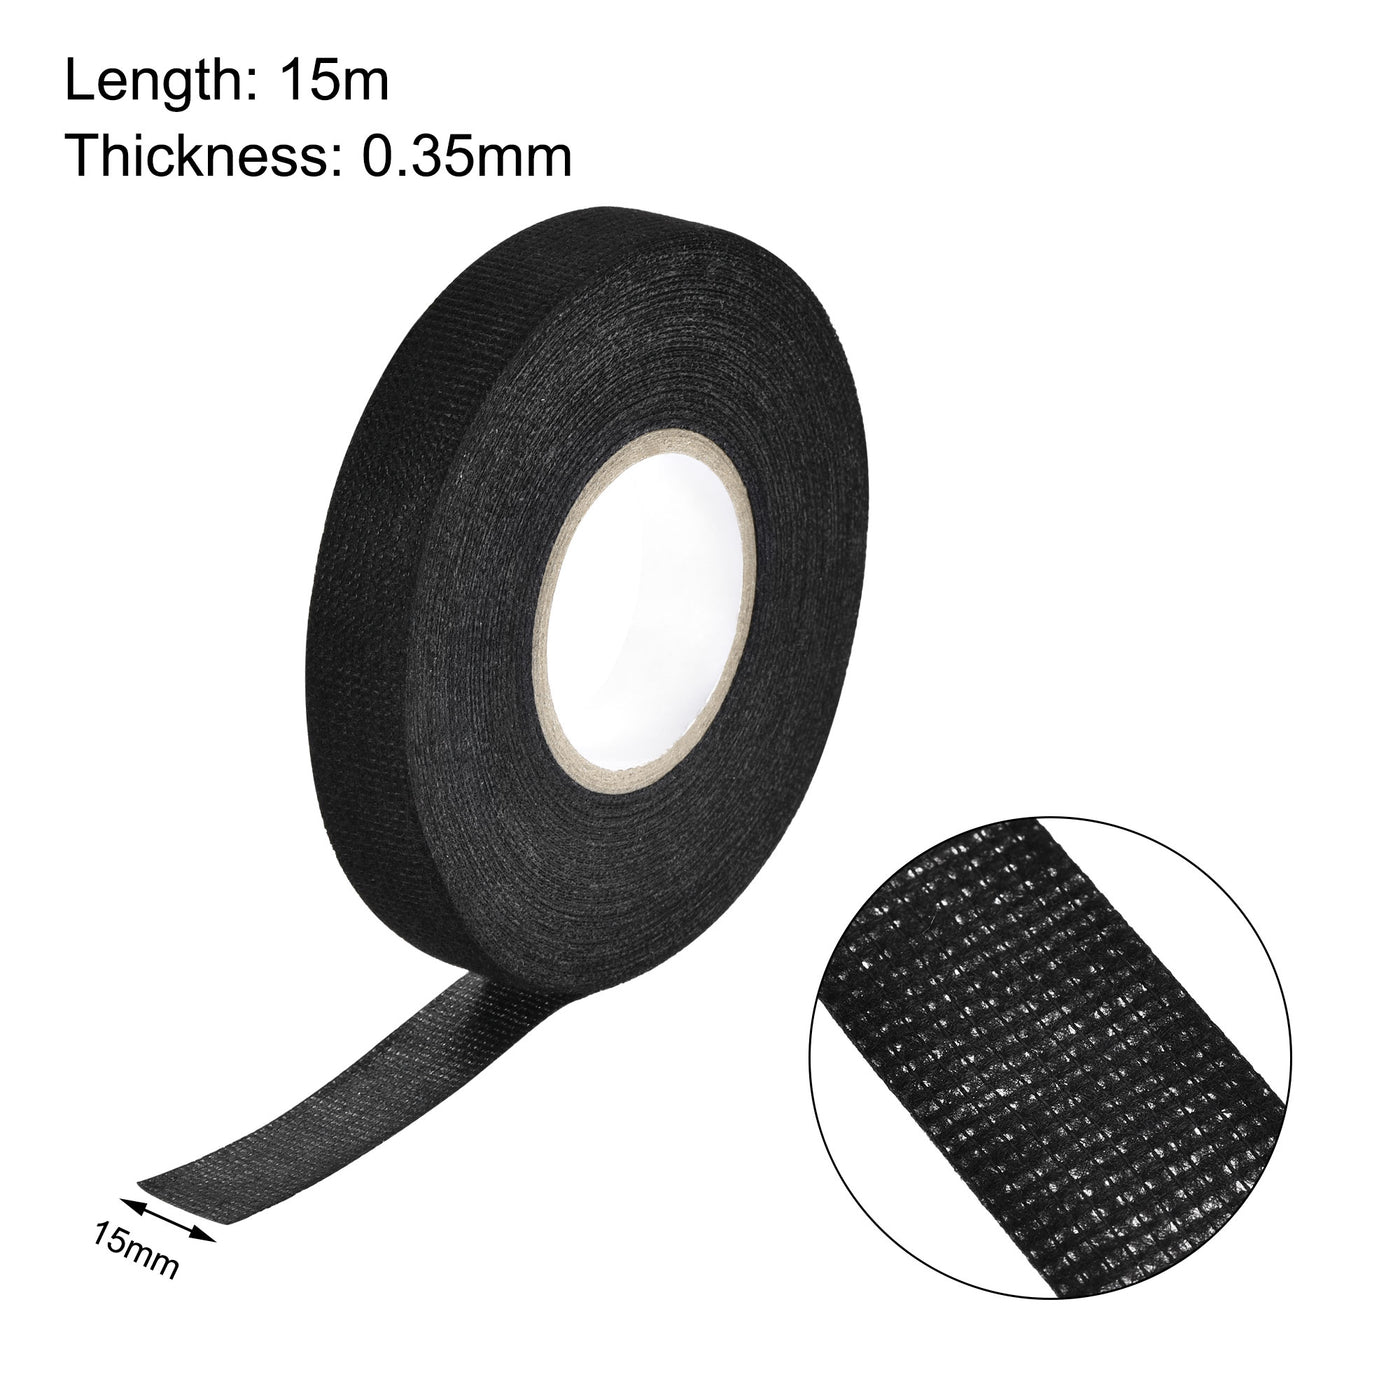 uxcell Uxcell Adhesive Cloth Fabric Tape Wire Harness Looms Single-Side 15mm x 15m Black 2 Pcs